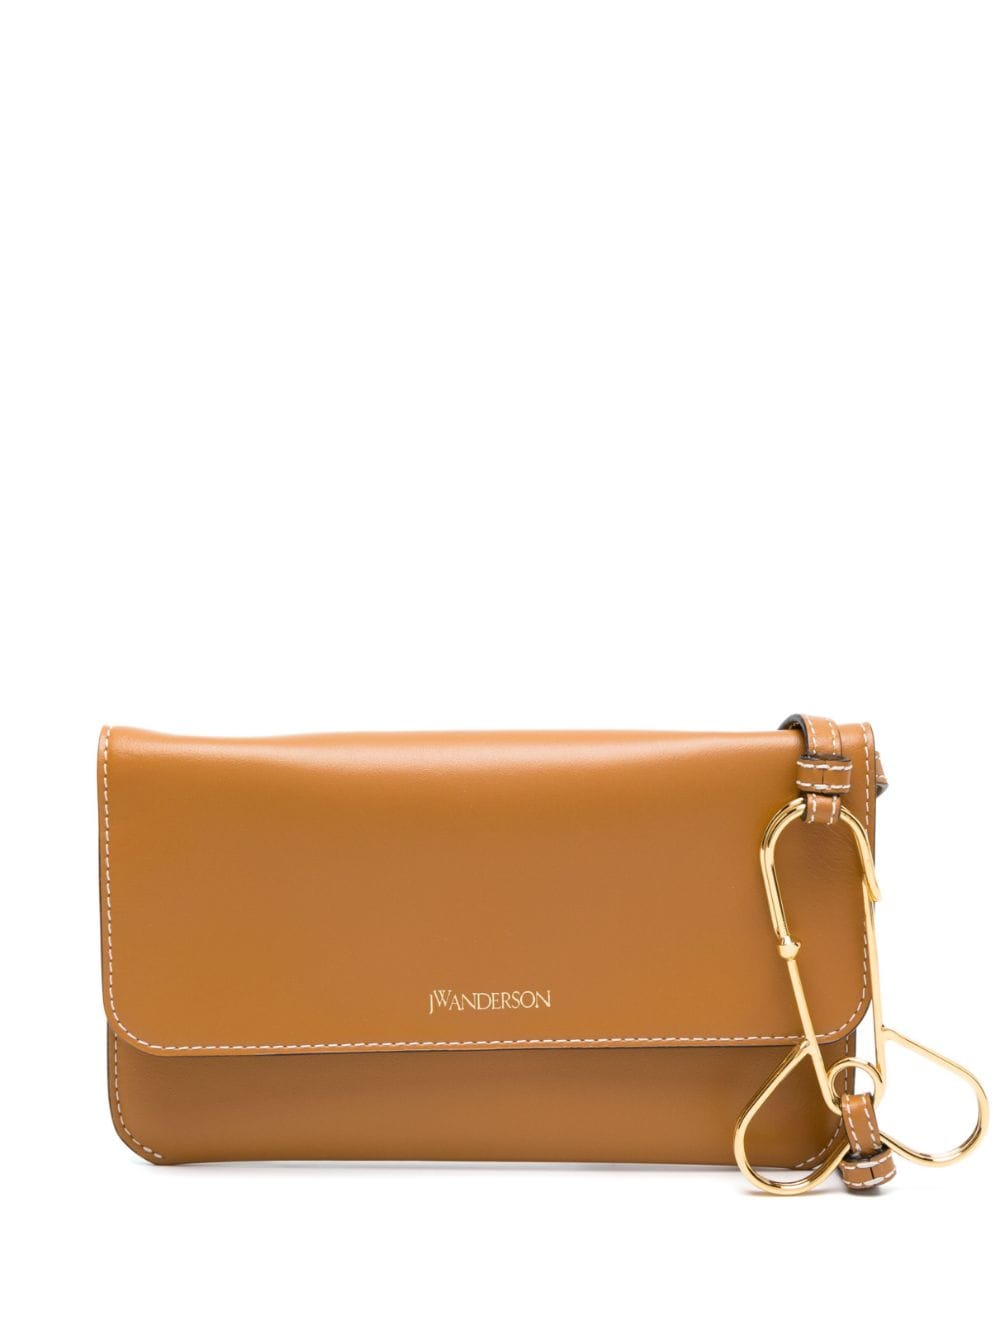 JW Anderson phone leather pouch bag - Brown